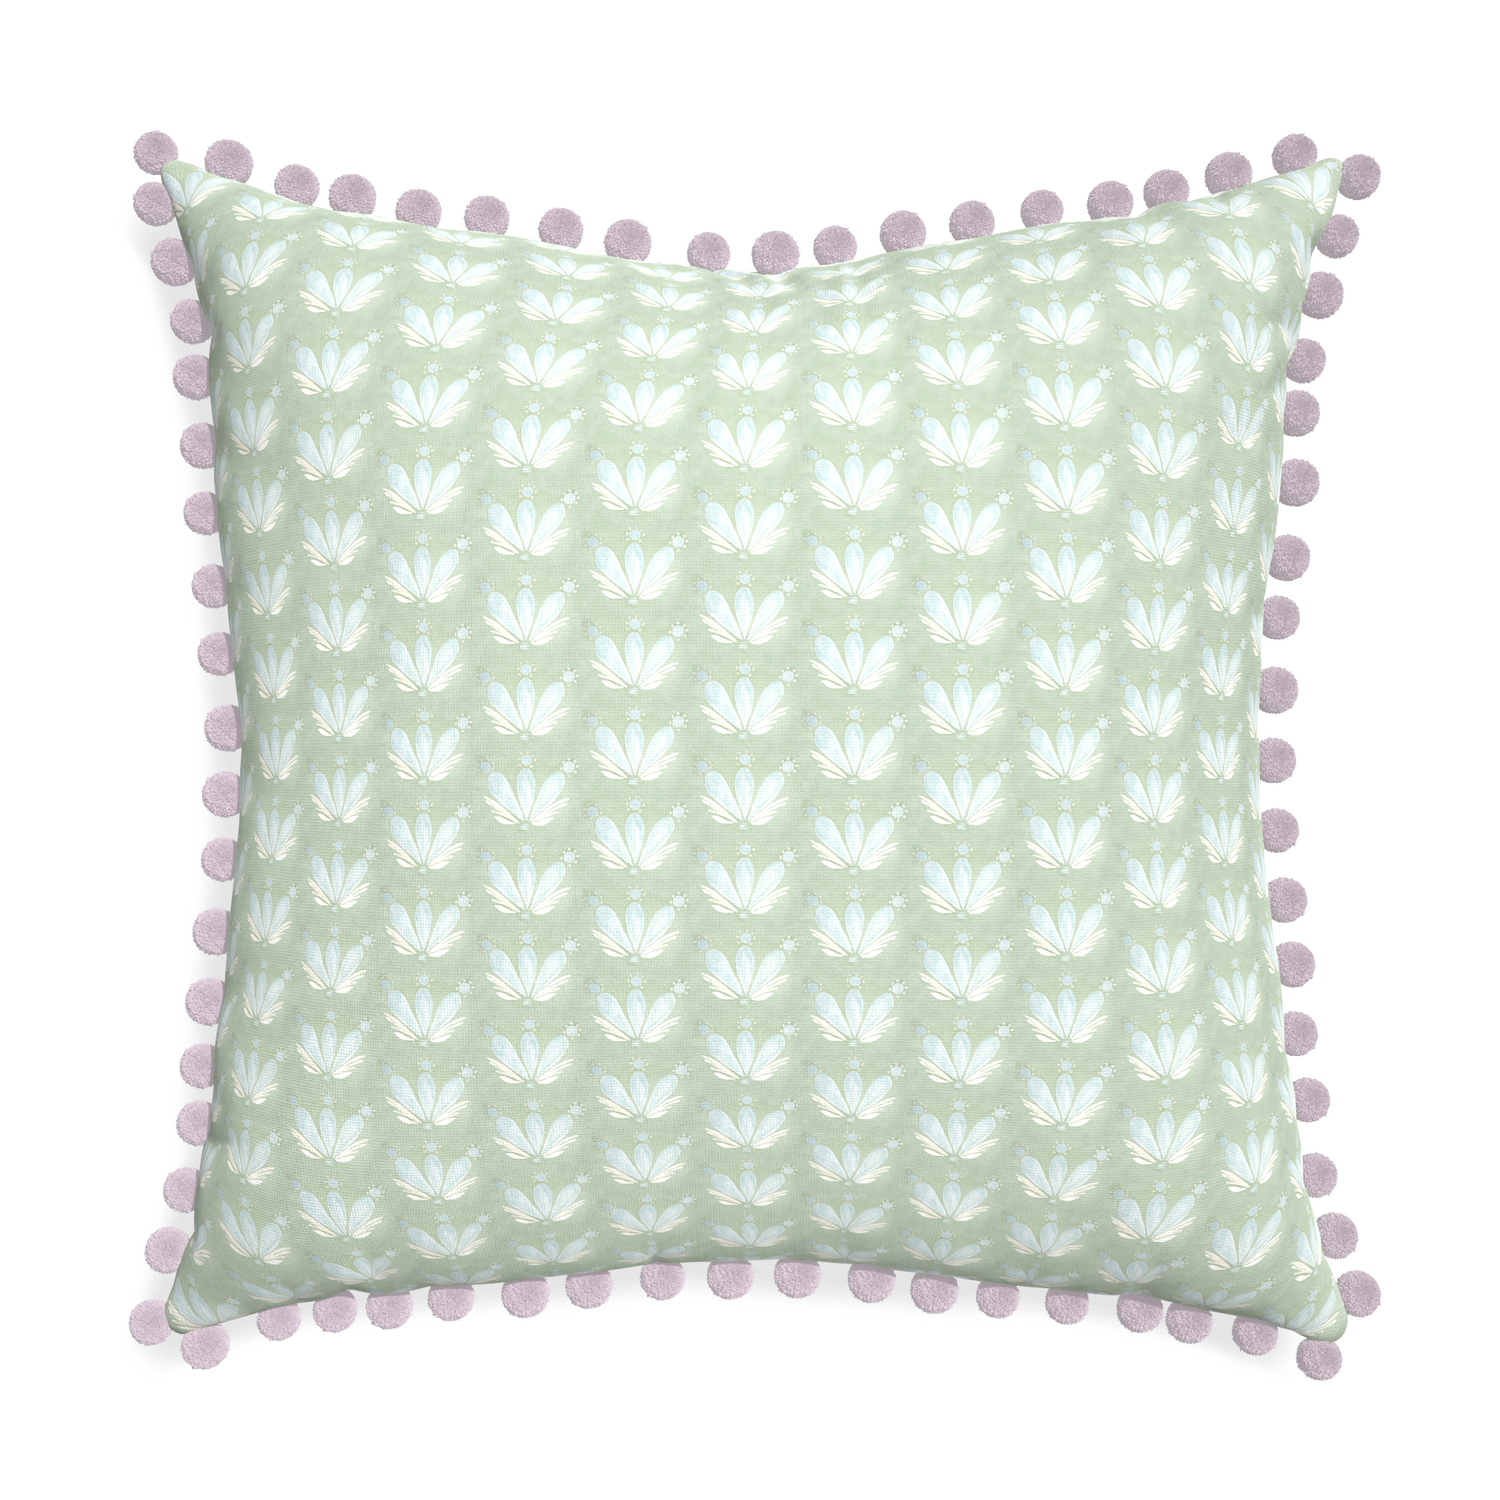 Euro-sham serena sea salt custom blue & green floral drop repeatpillow with l on white background